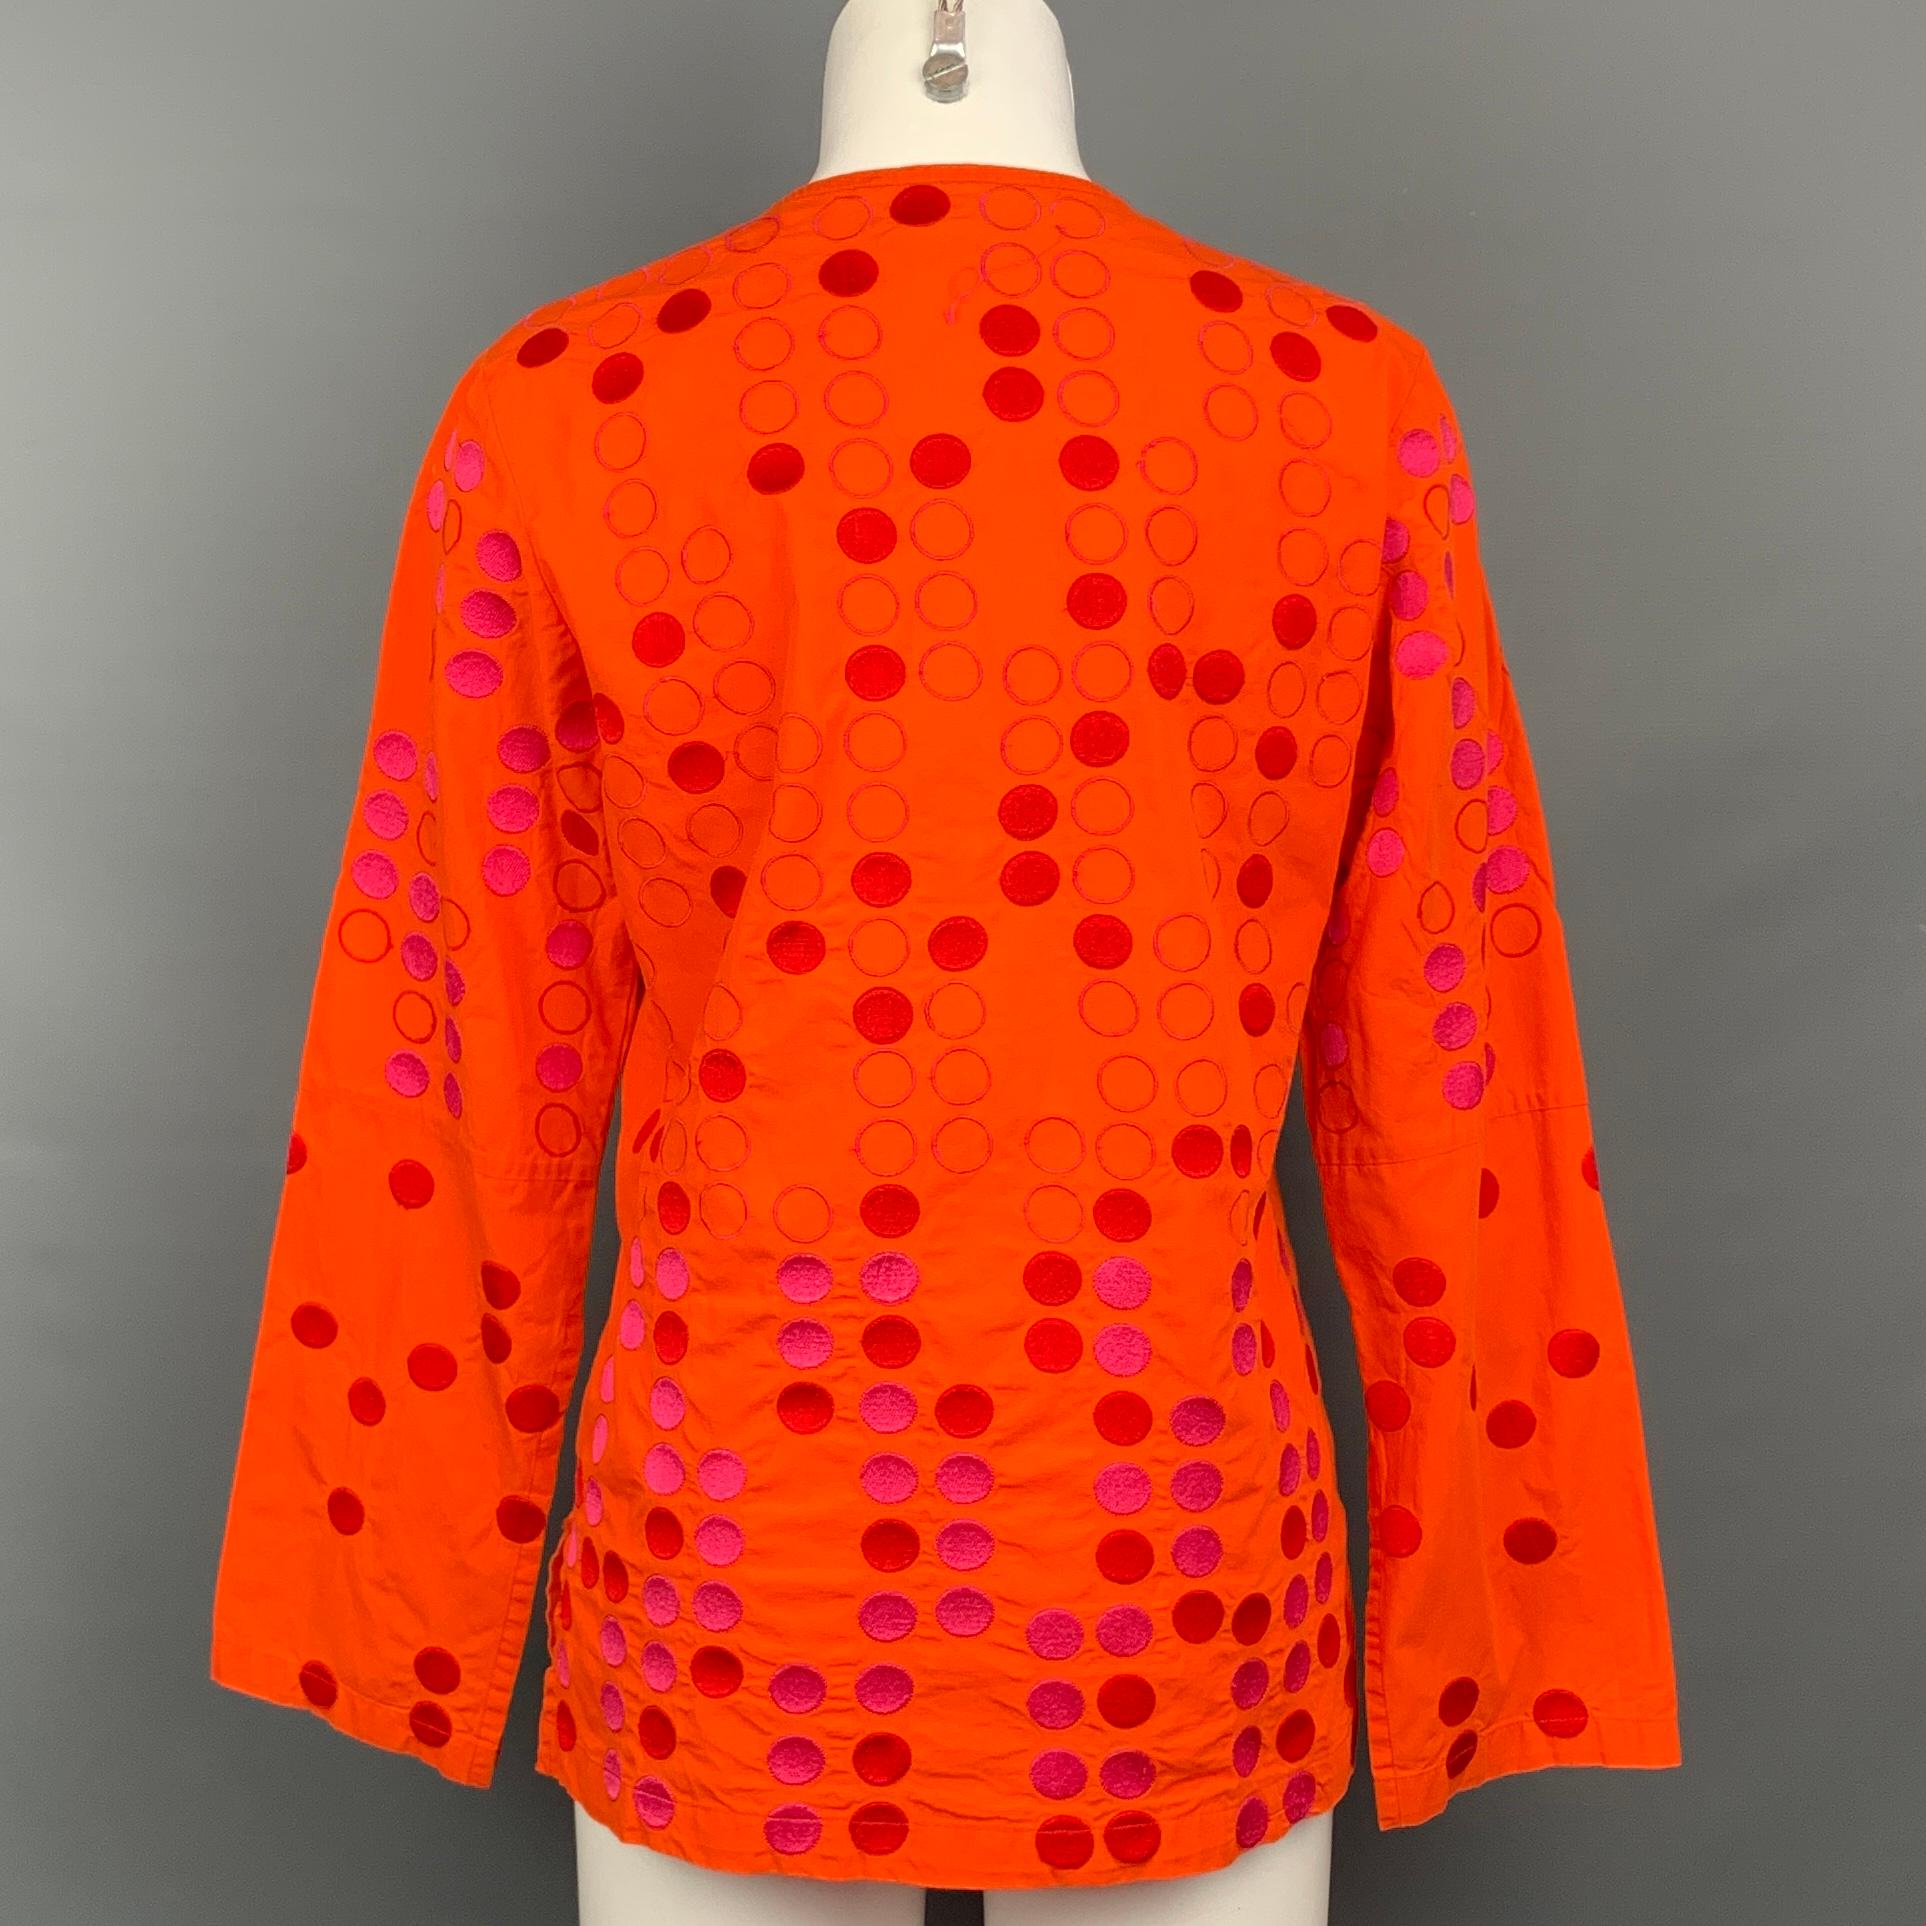 ALPANA BAWA blouse comes in a orange & fuchsia cotton featuring a v-neck ans slit sleeves. 

Very Good Pre-Owned Condition.
Marked: M

Measurements:

Shoulder: 16 in.
Bust: 38 in.
Sleeve: 24 in.
Length: 25.5 in. 